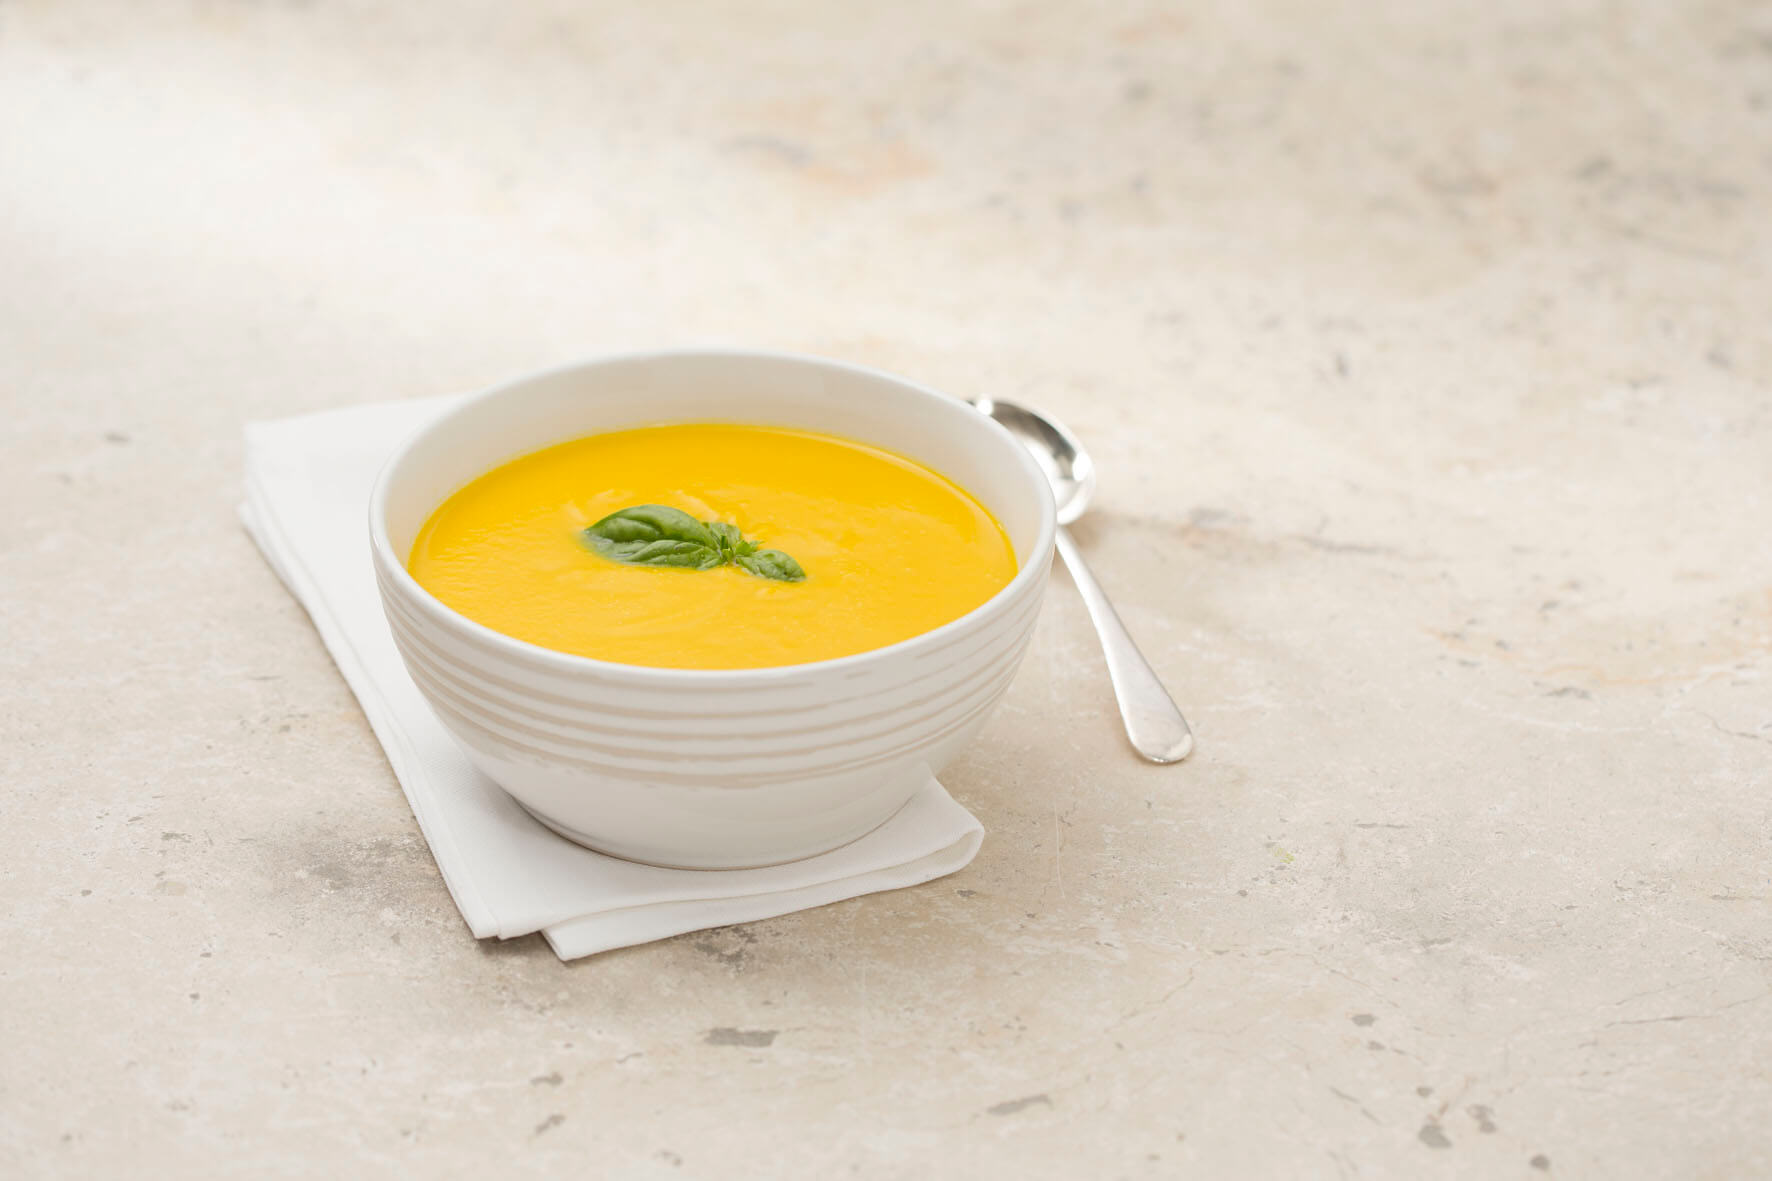 Thermomix Pumpkin Soup - a family favourite